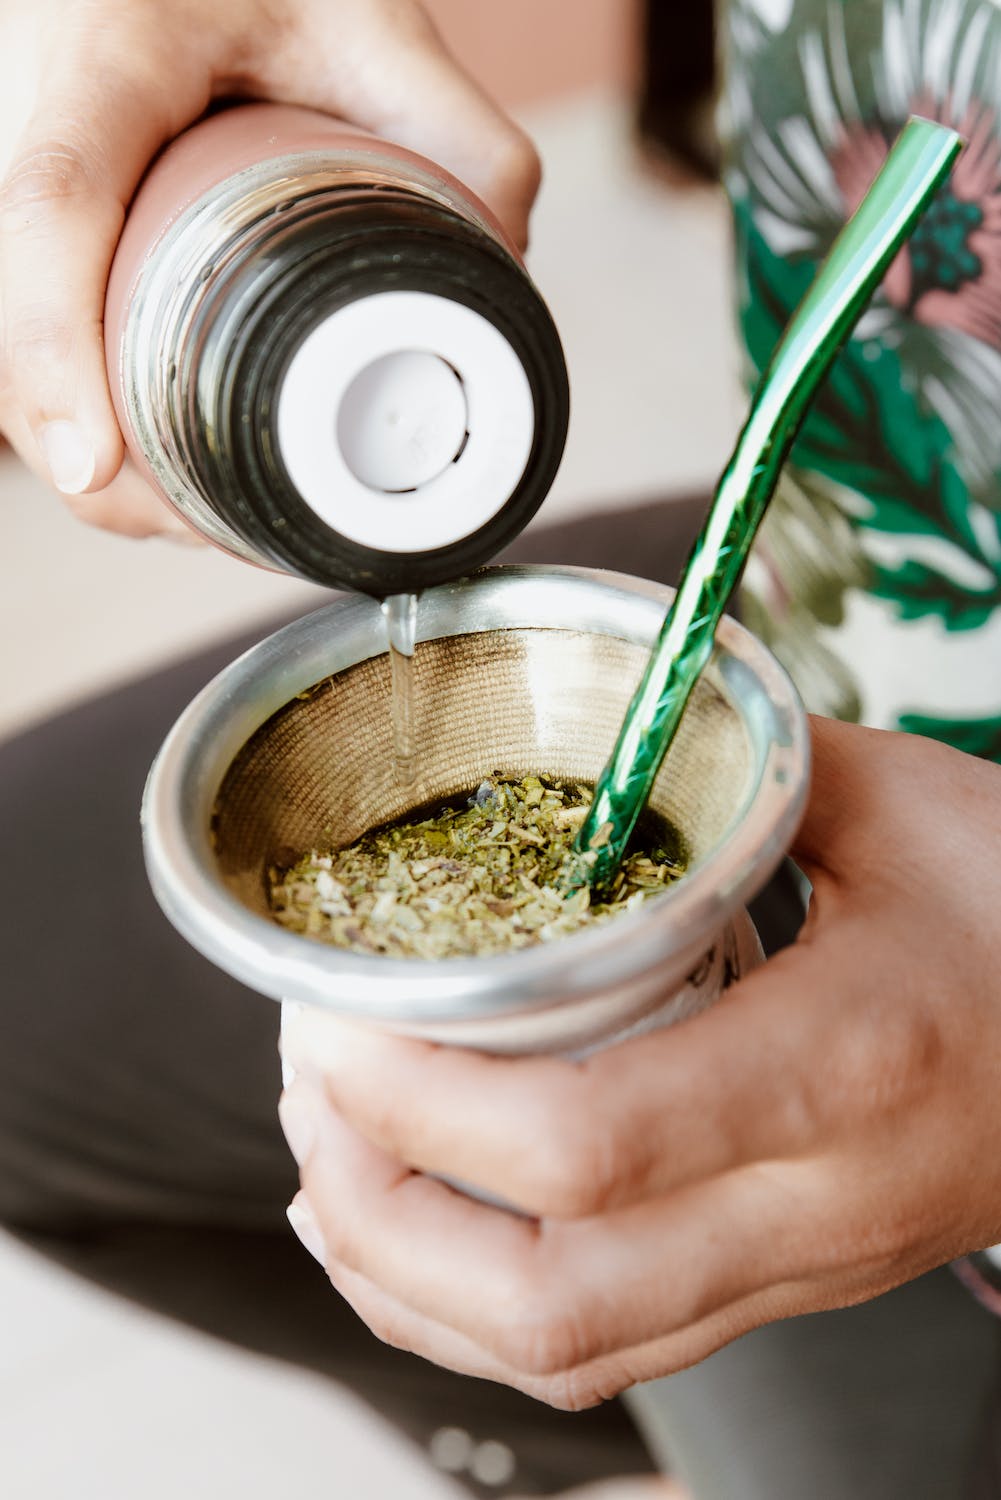 Drinking Yerba Mate Tea Could Give You a Boost—Without the Jitters